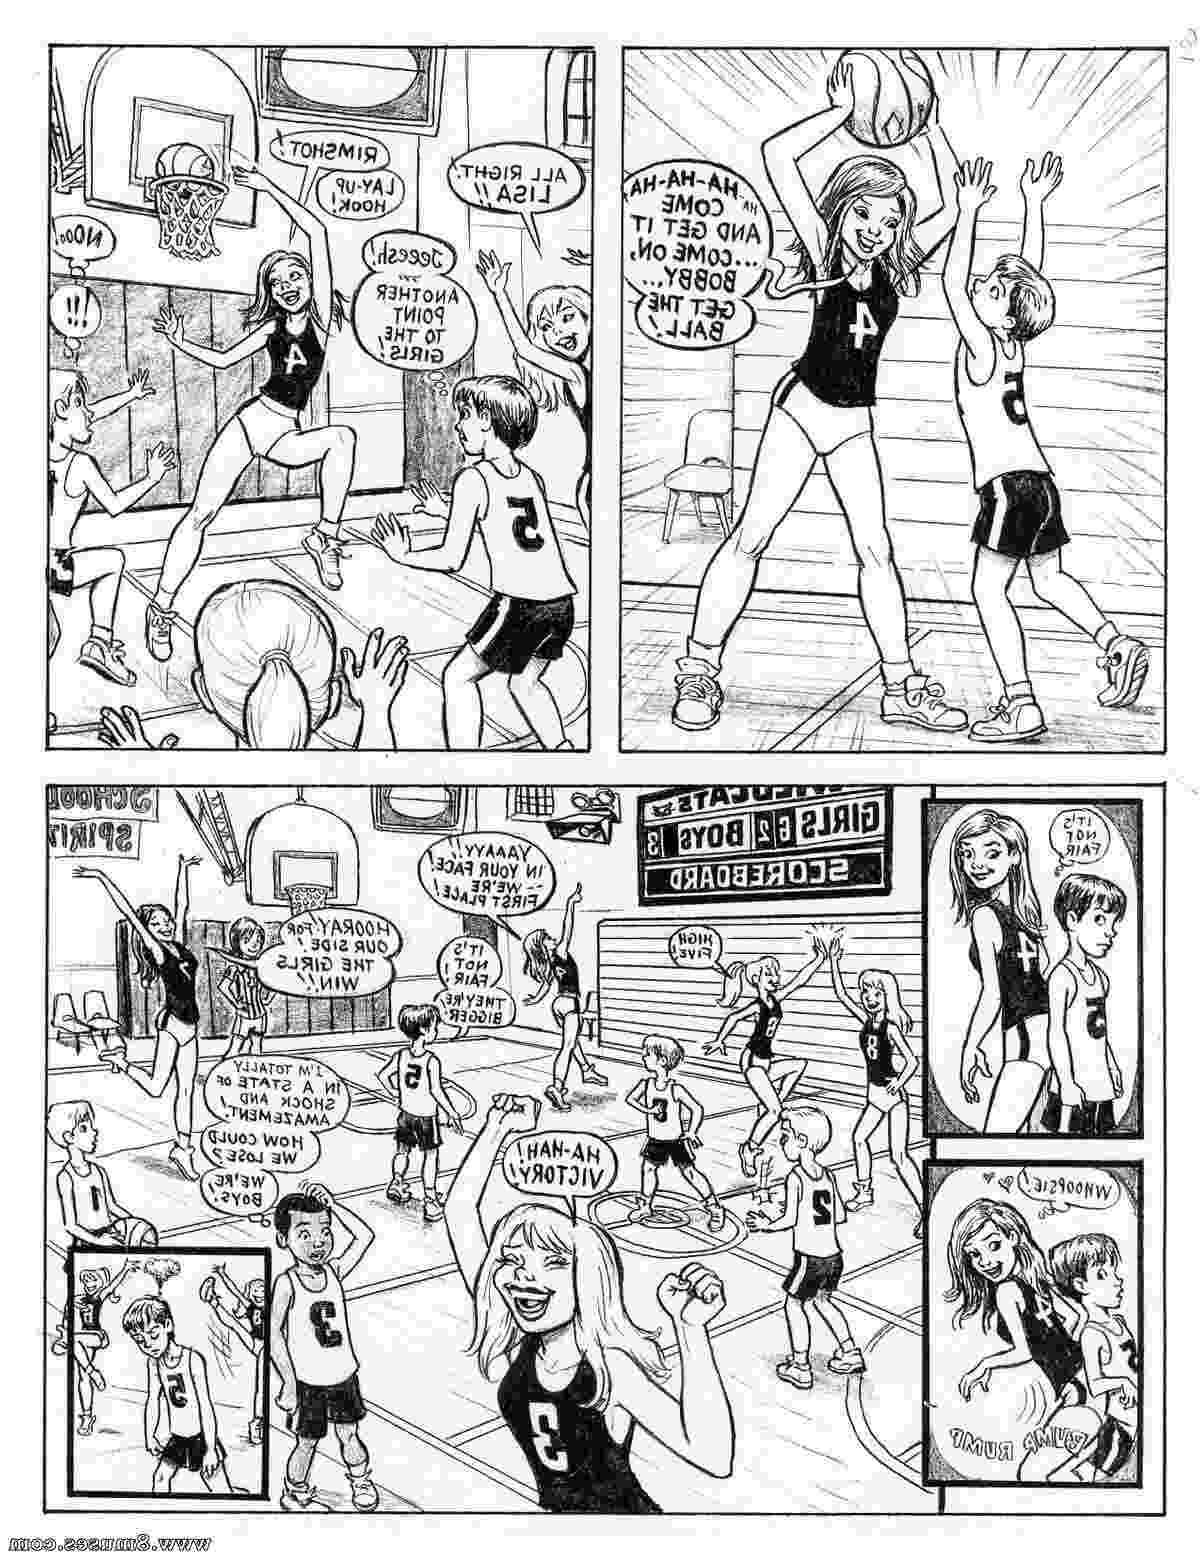 DreamTales-Comics/Something-in-The-Water Something_in_The_Water__8muses_-_Sex_and_Porn_Comics_7.jpg